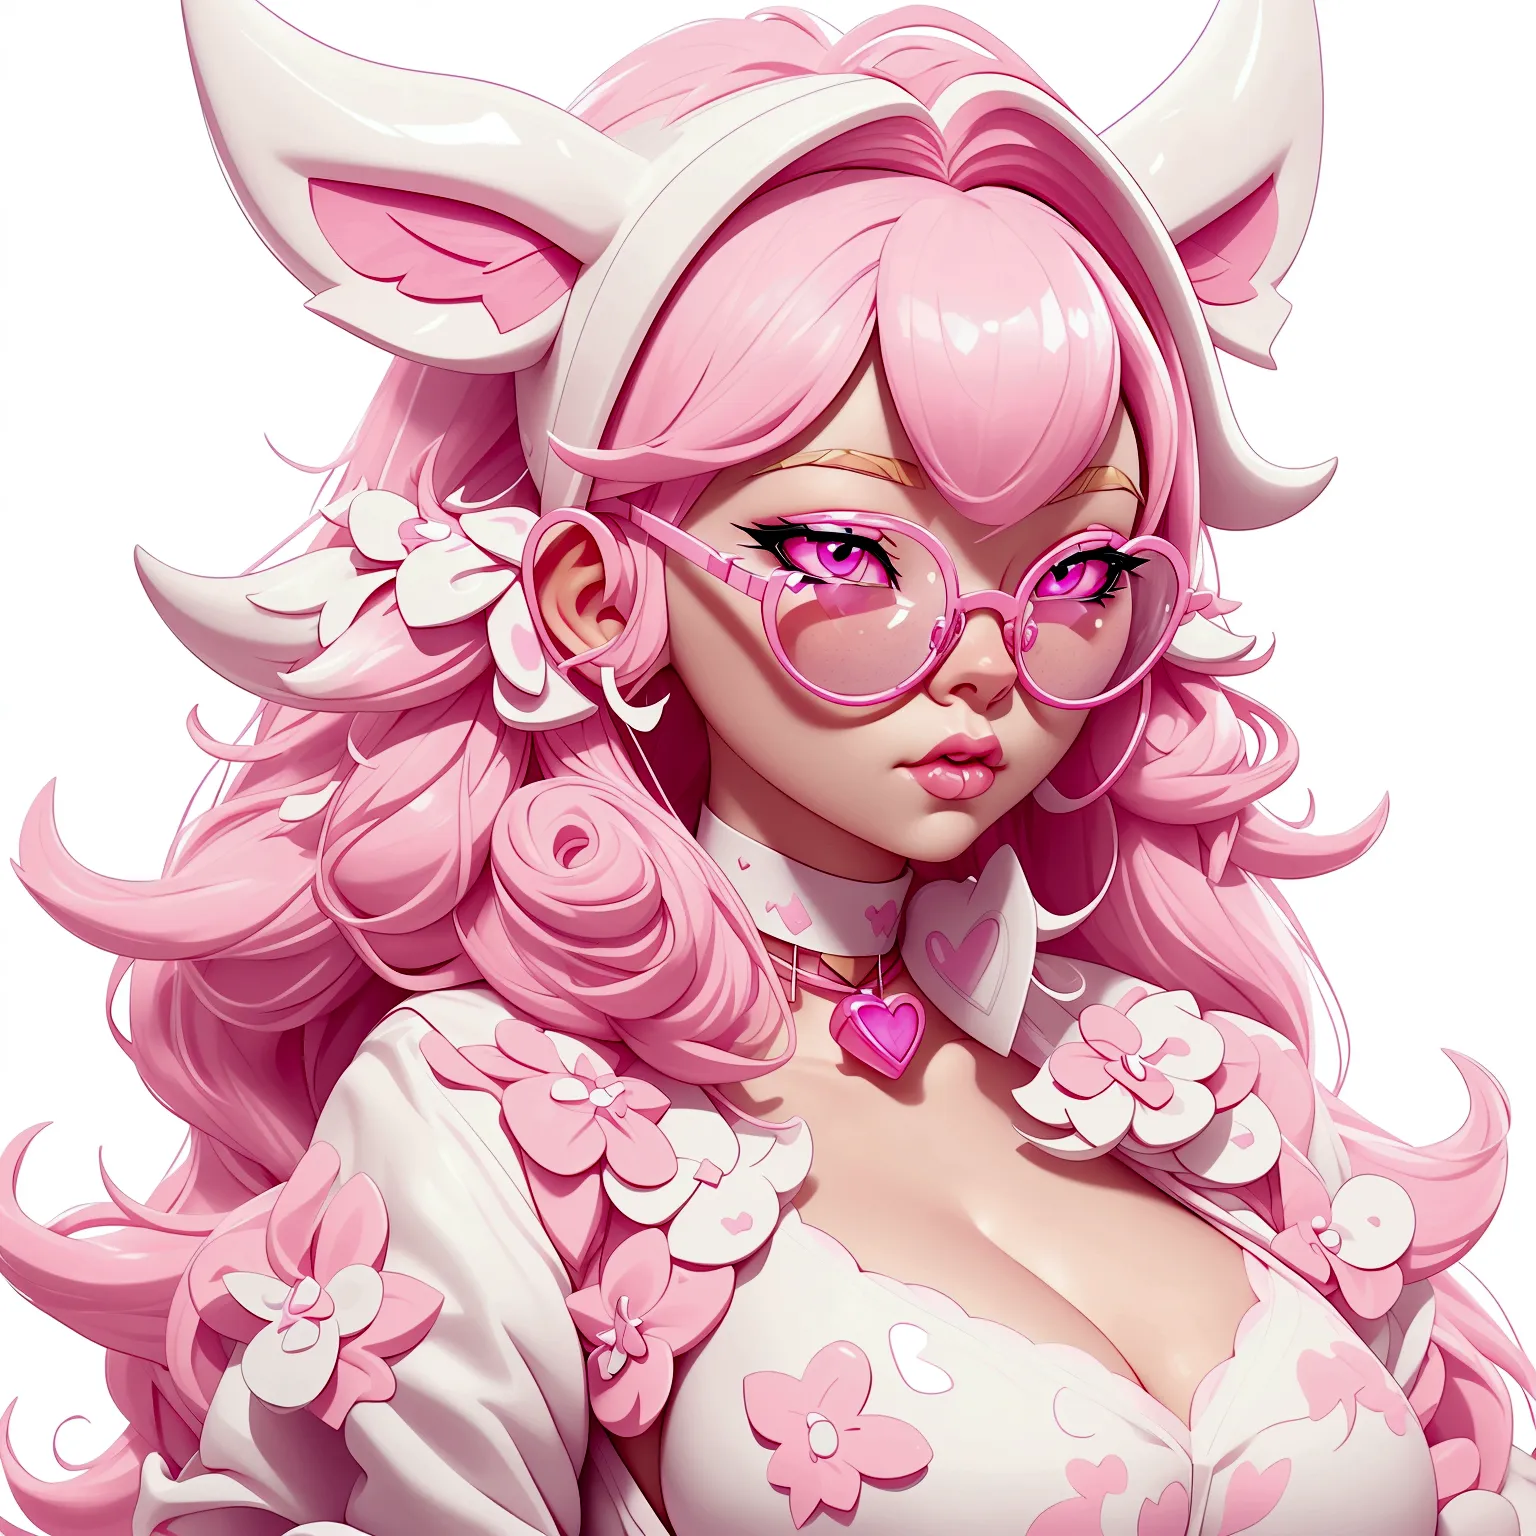 "IMVU, pink hair, pink heart eyes, white round glasses, pale skin, white and pink cow ears, white horns with pink bows, fuzzy wh...